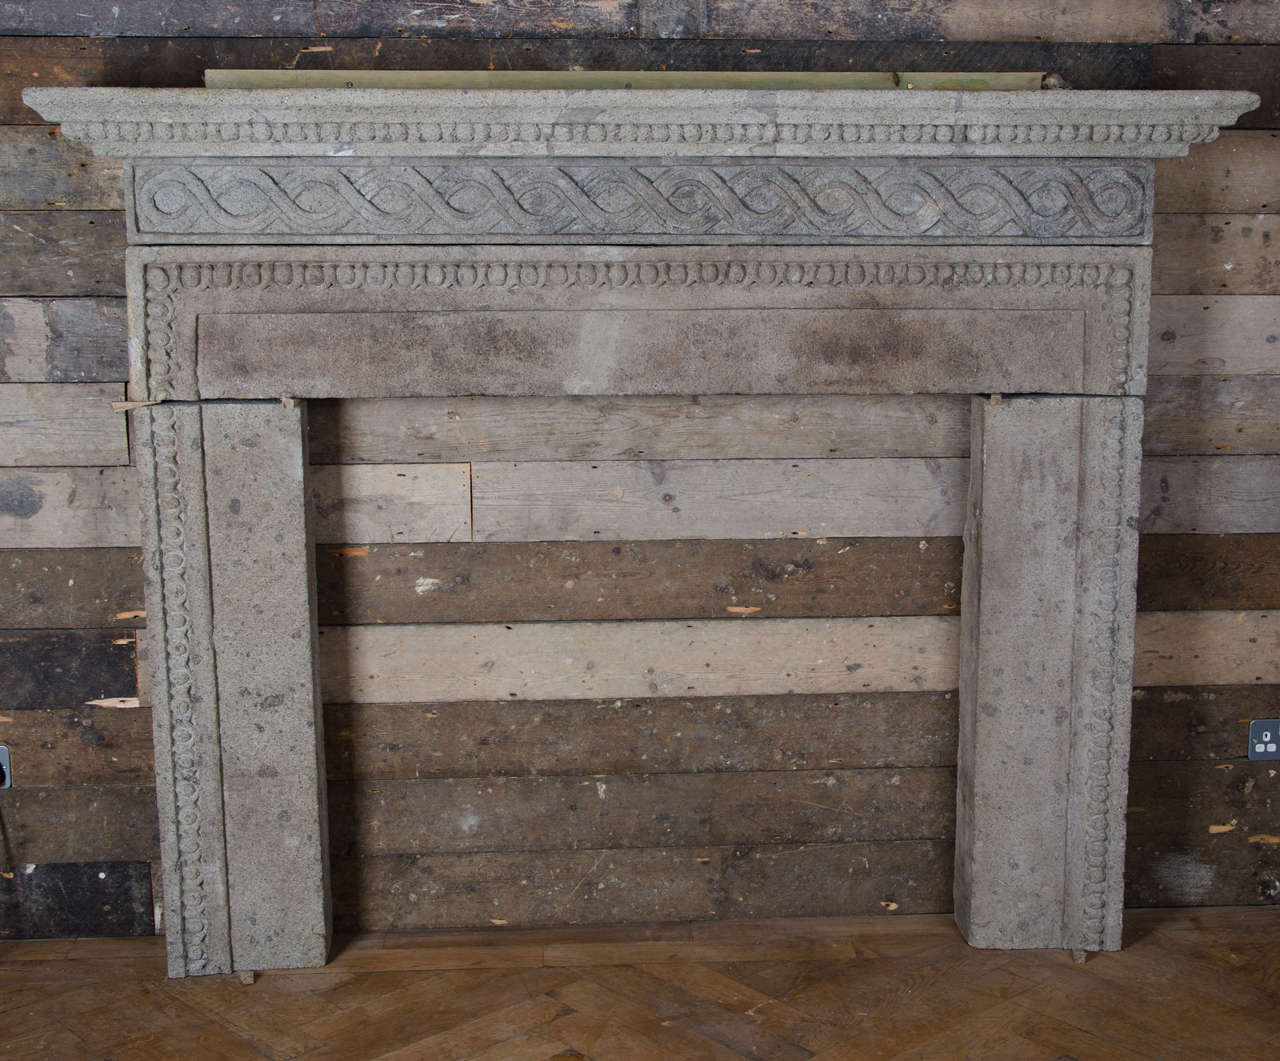 An impressive and imposing carved stone fireplace surround in the Italian Renaissance manner. This antique surround has a characterful weathered finished and features a carved egg and dart trim around the opening and a guilloche decoration on the